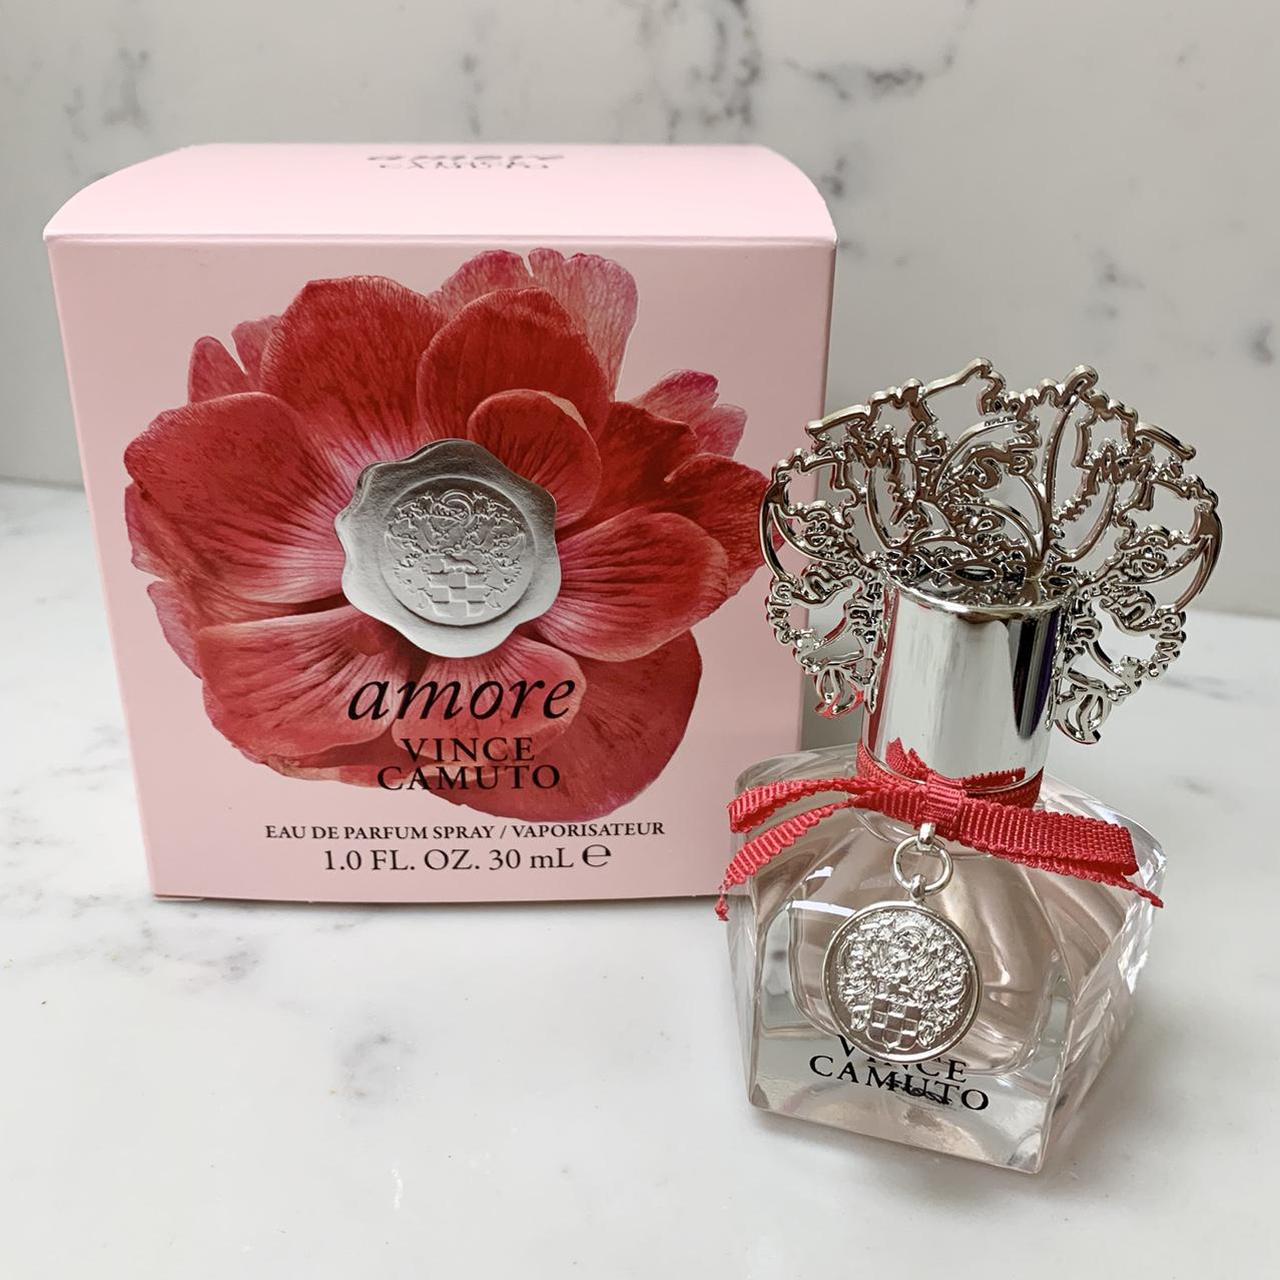 Vince Camuto Amore by Vince Camuto for Women – Fragrance Outlet